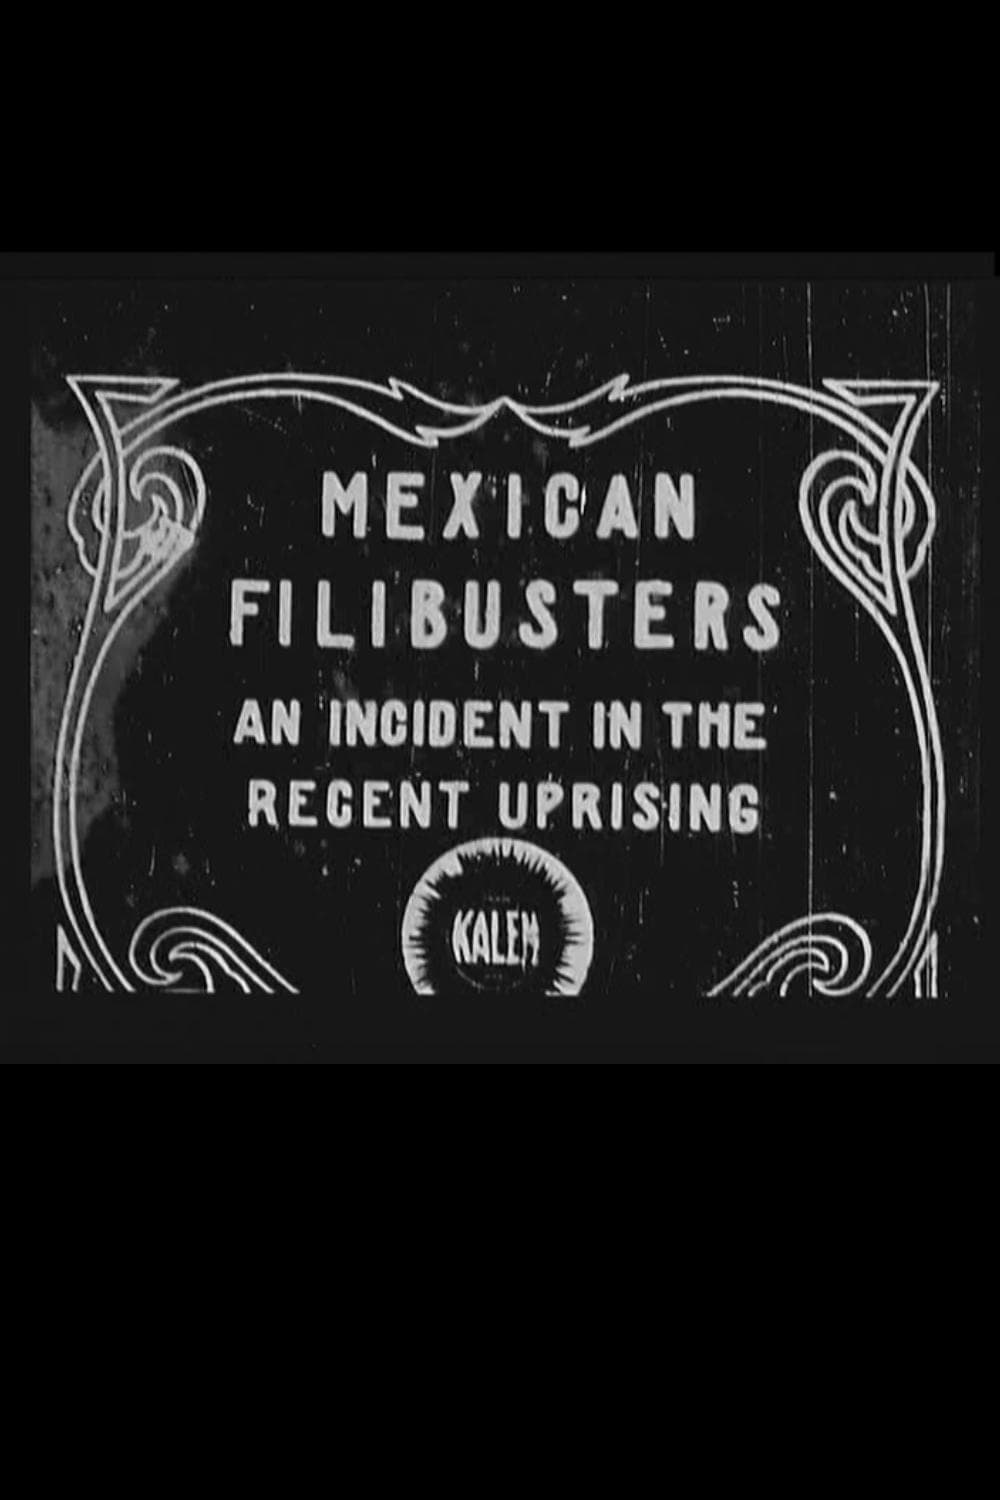 Mexican Filibusters